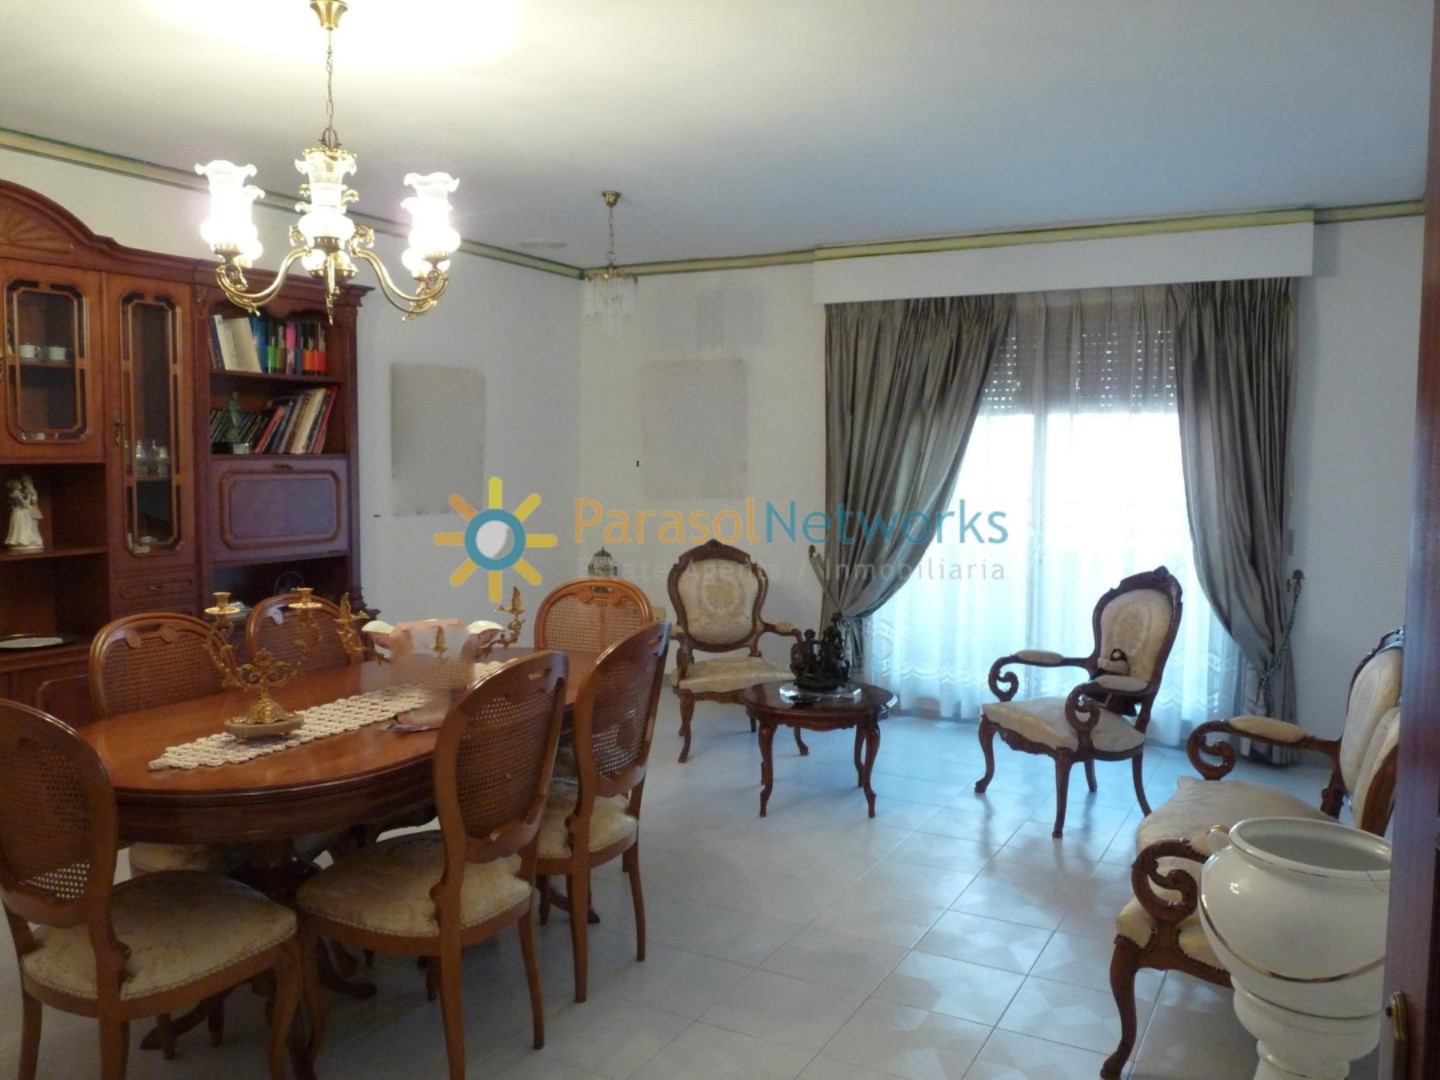 Penthouse for sale in Oliva – Ref: 778